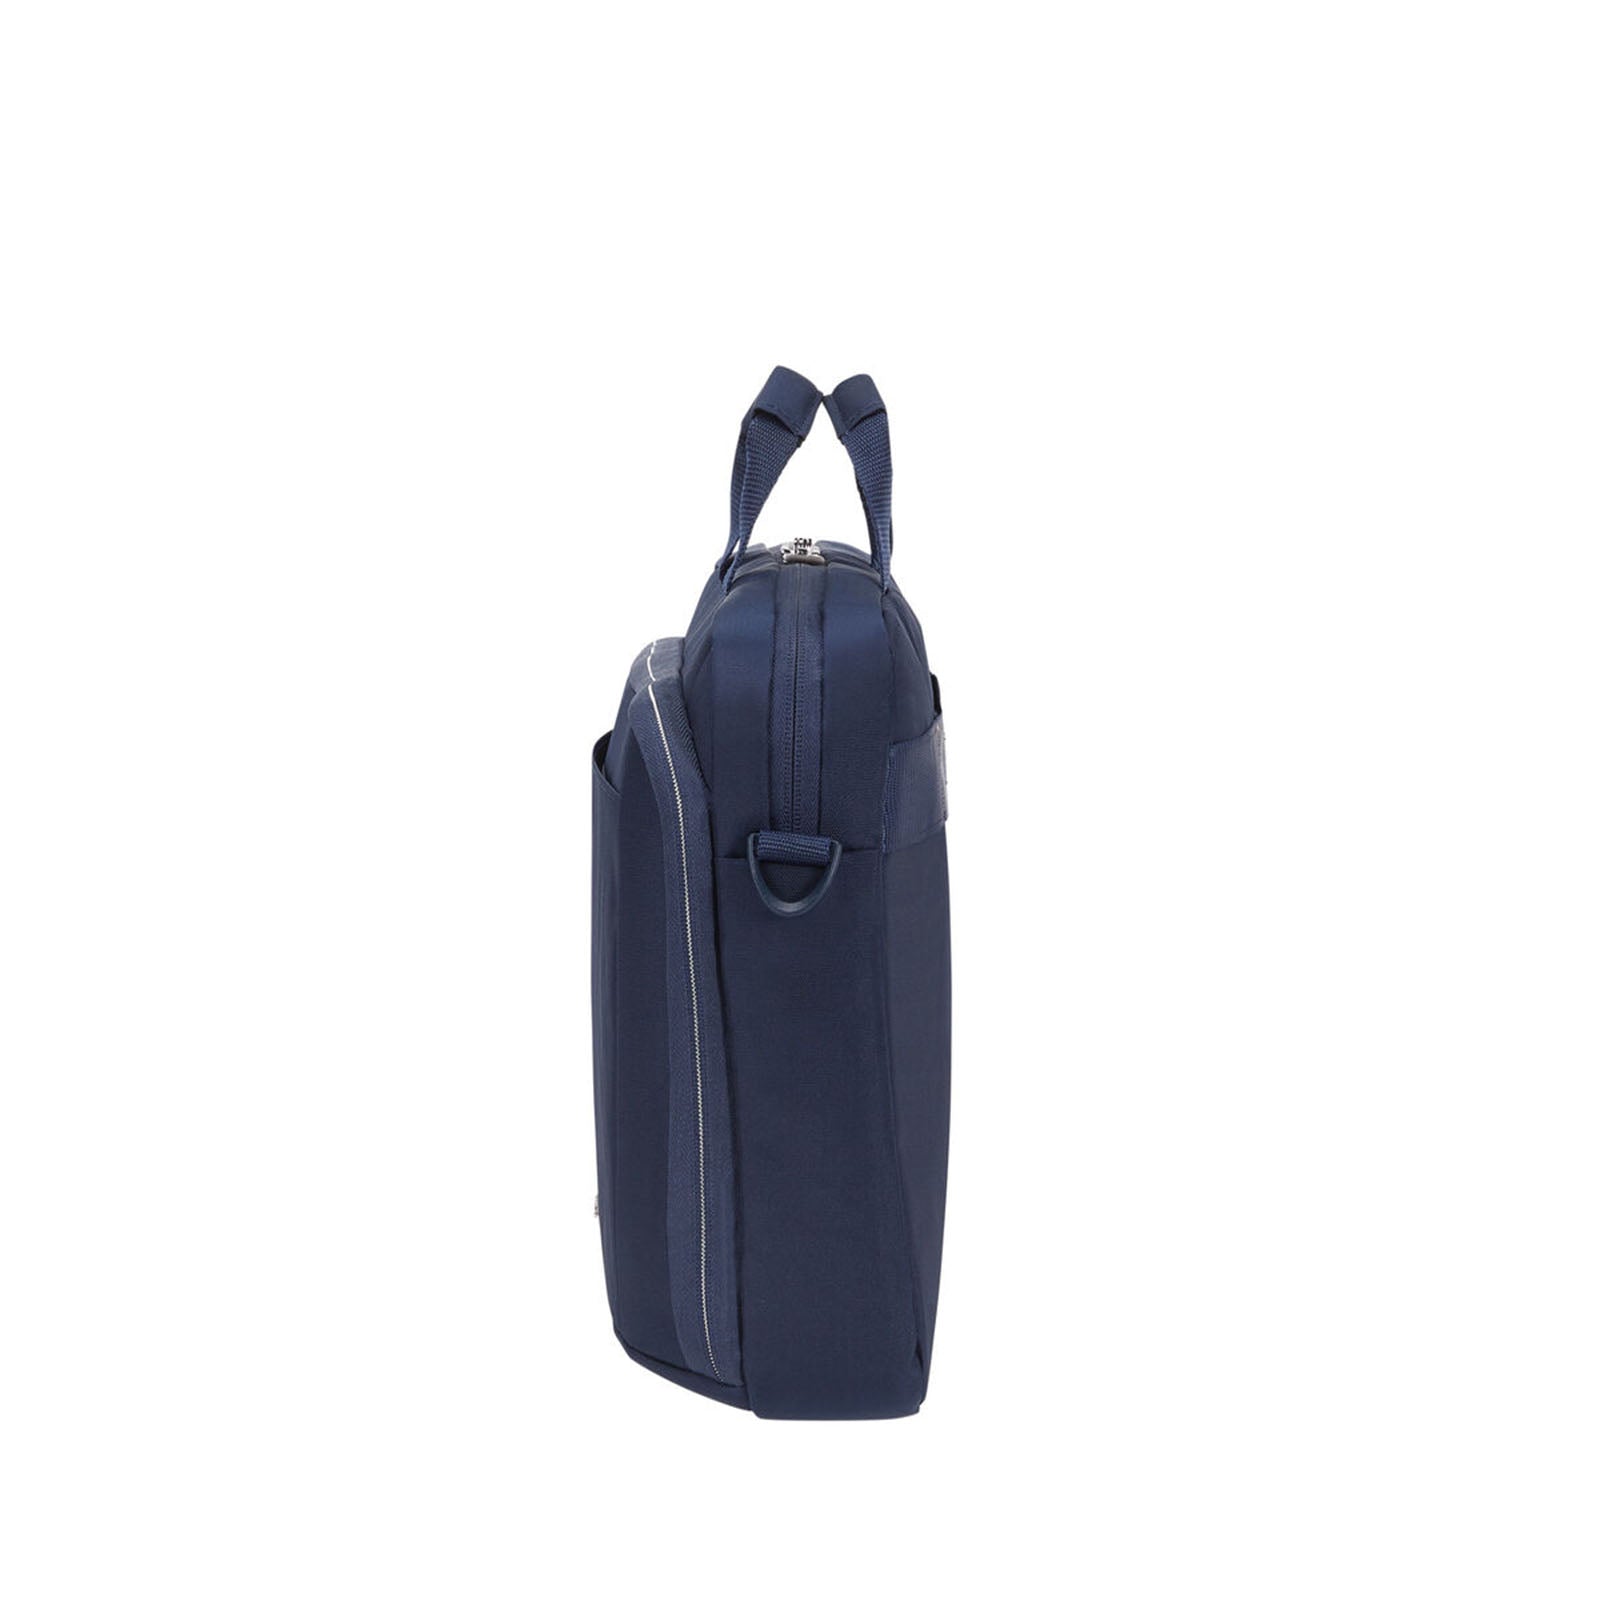 Samsonite-Guardit-Classy-15-Inch-Laptop-Bailhandle-Midnight-Blue-Side1